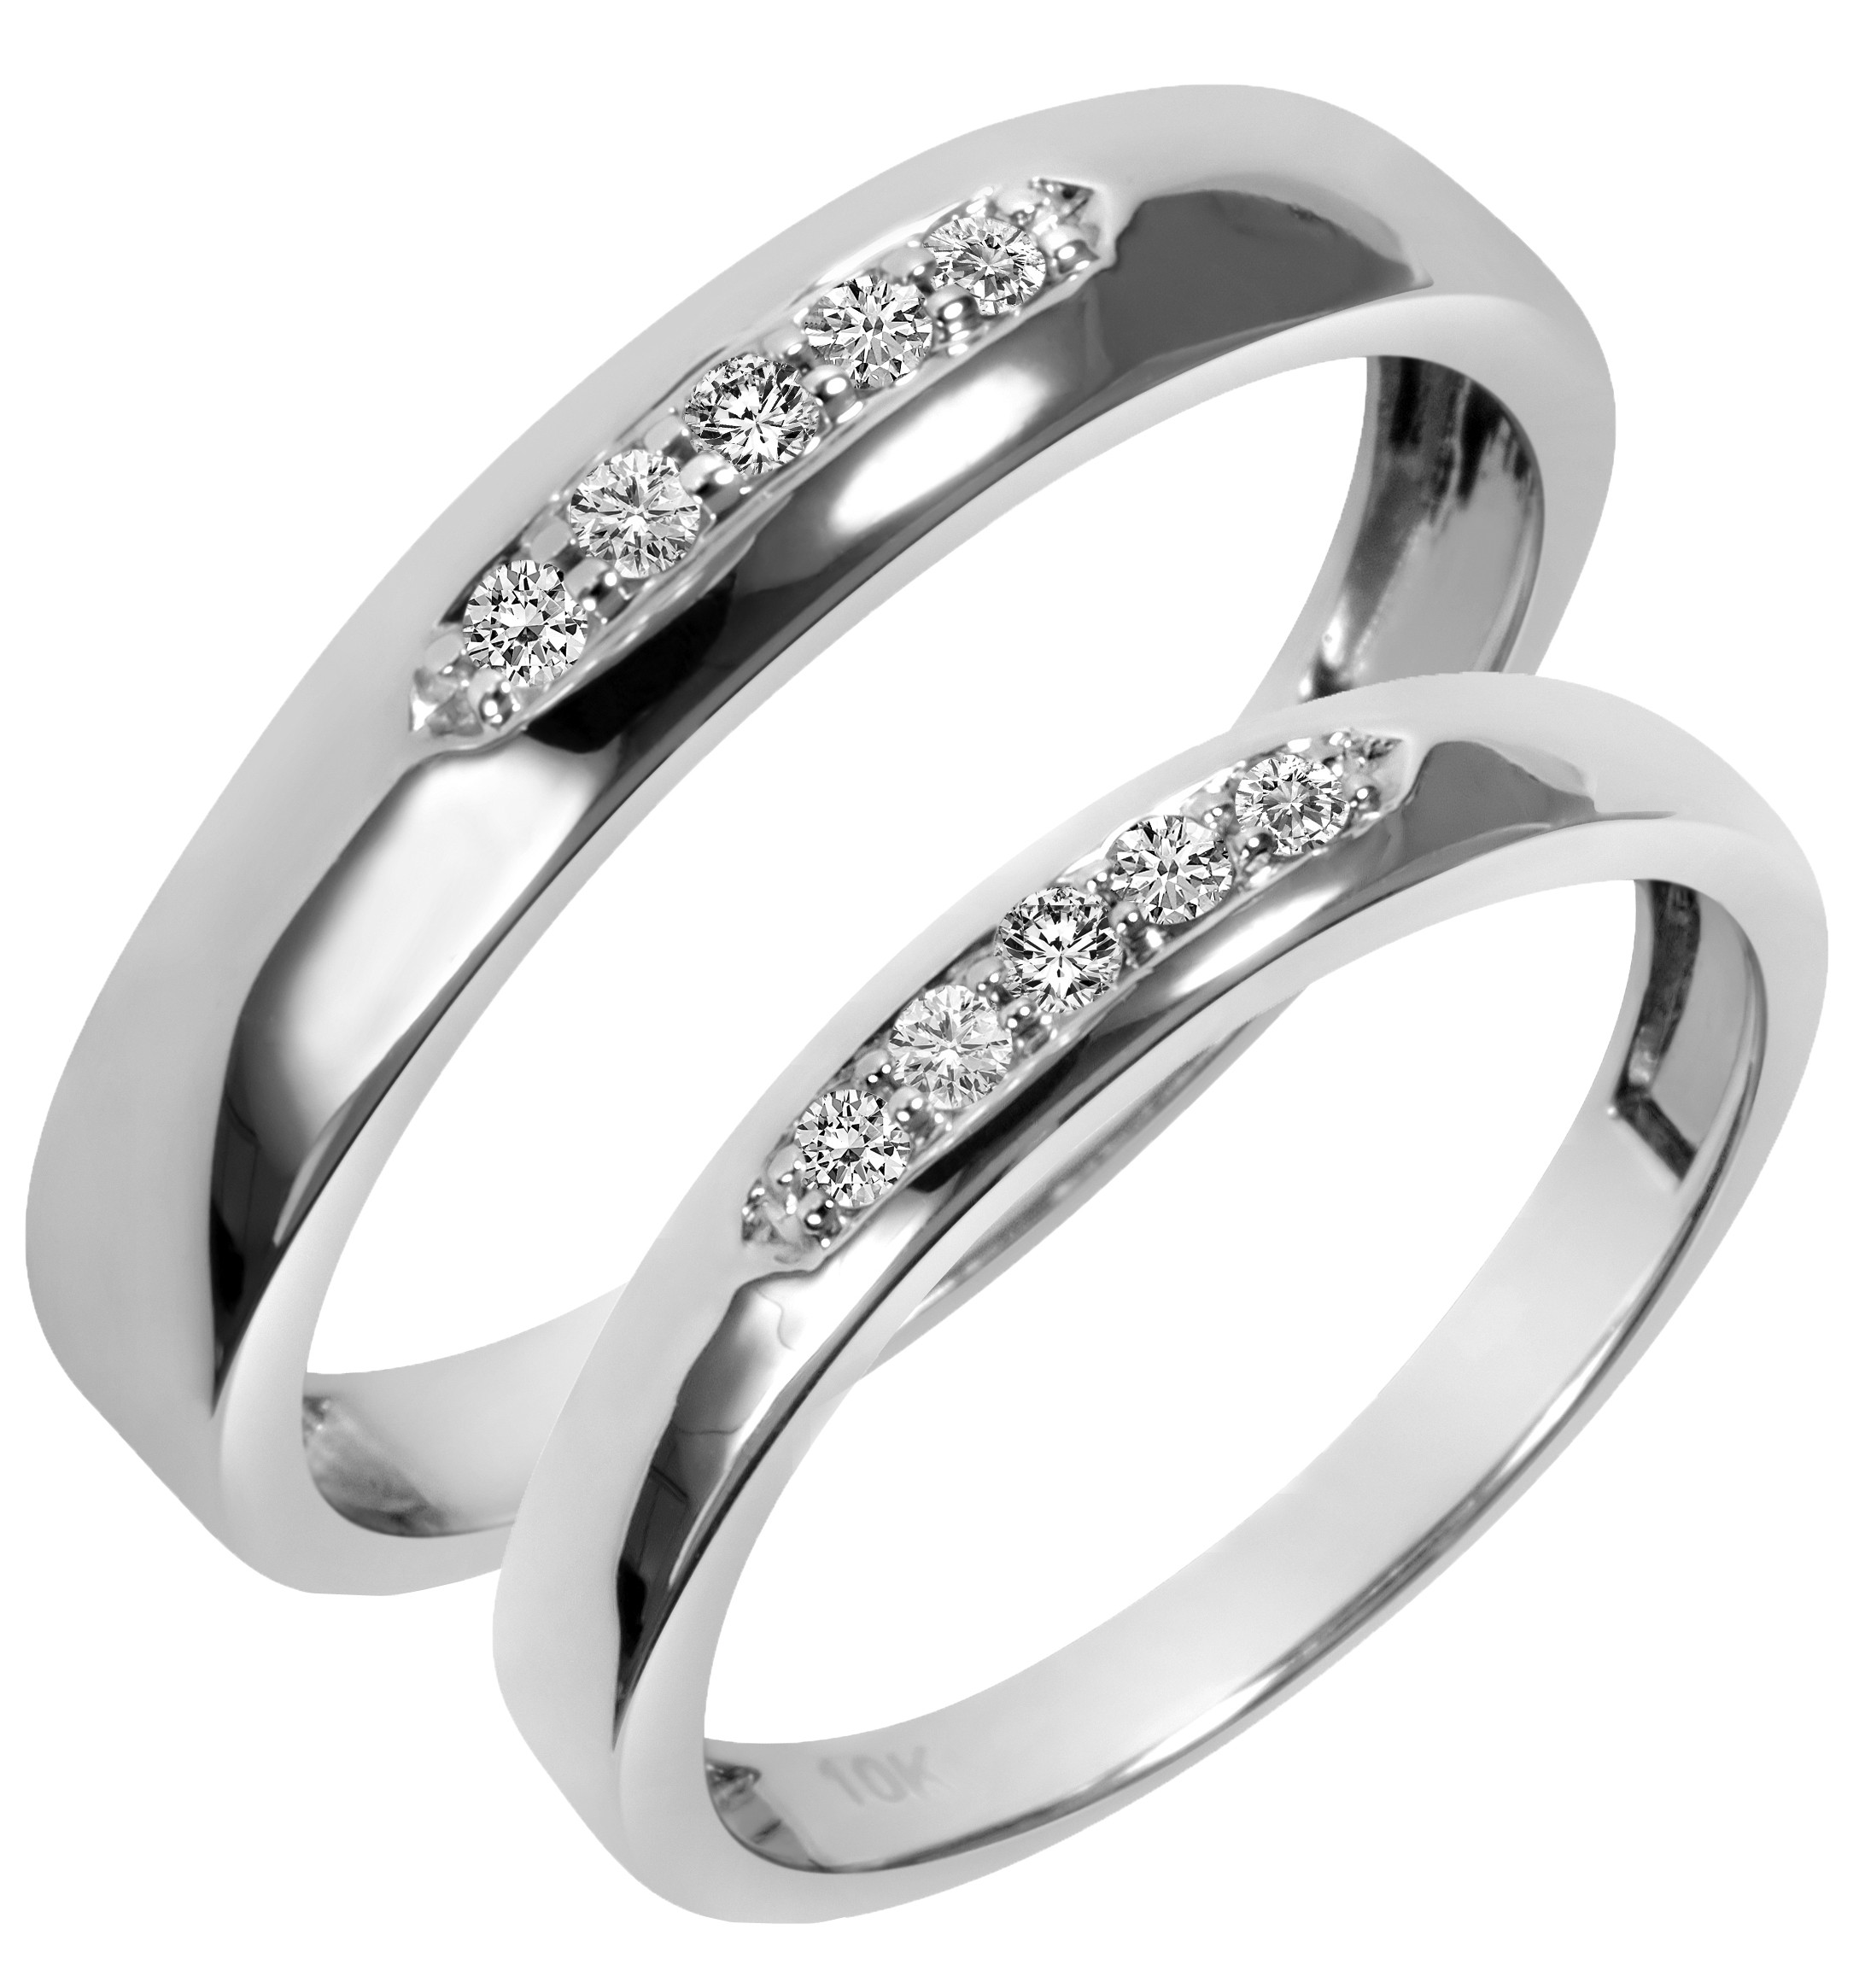 Wedding Ring Sets His And Hers
 White Gold Wedding Ring Sets His And Hers